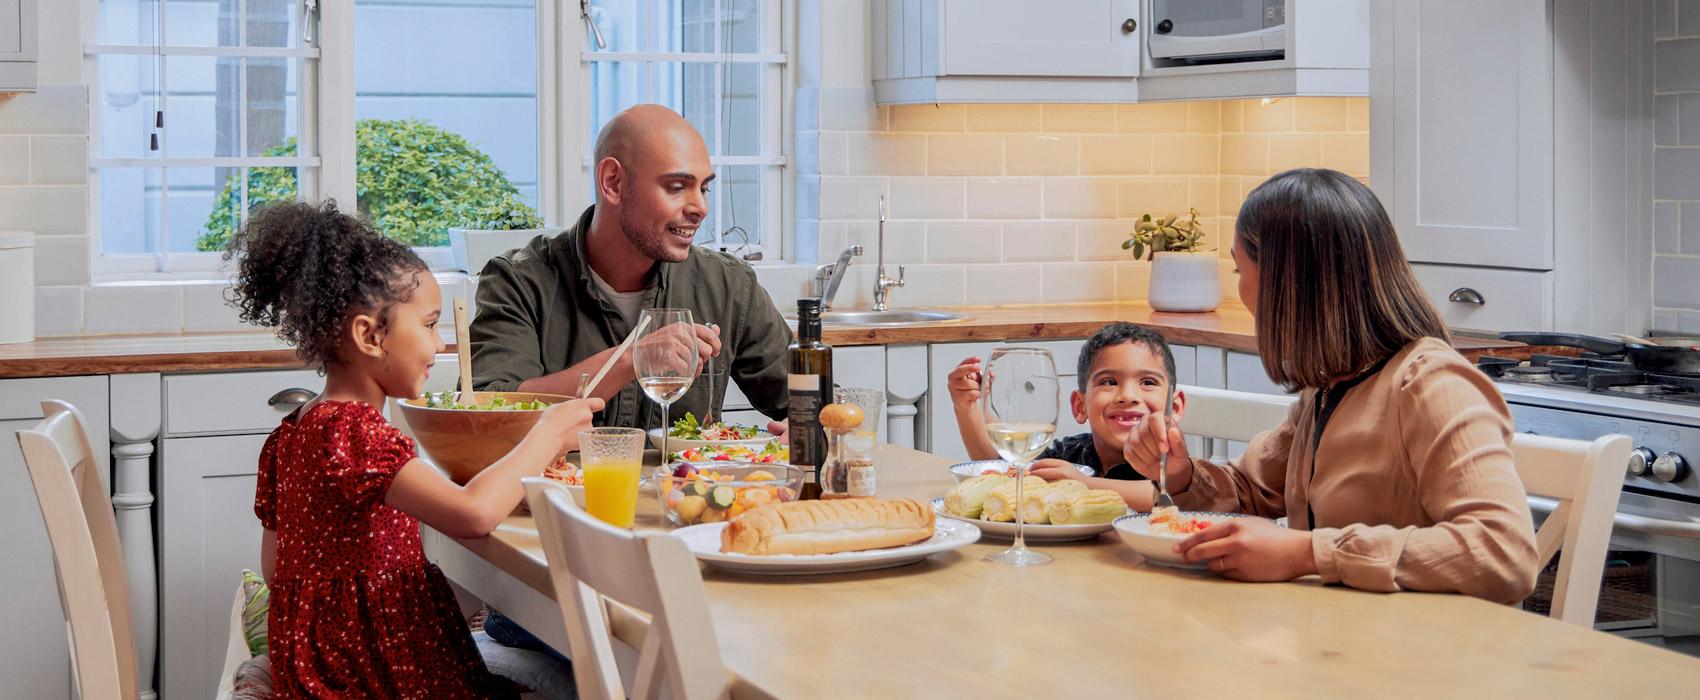 Happy young family sitting at dinner table in kitchen.